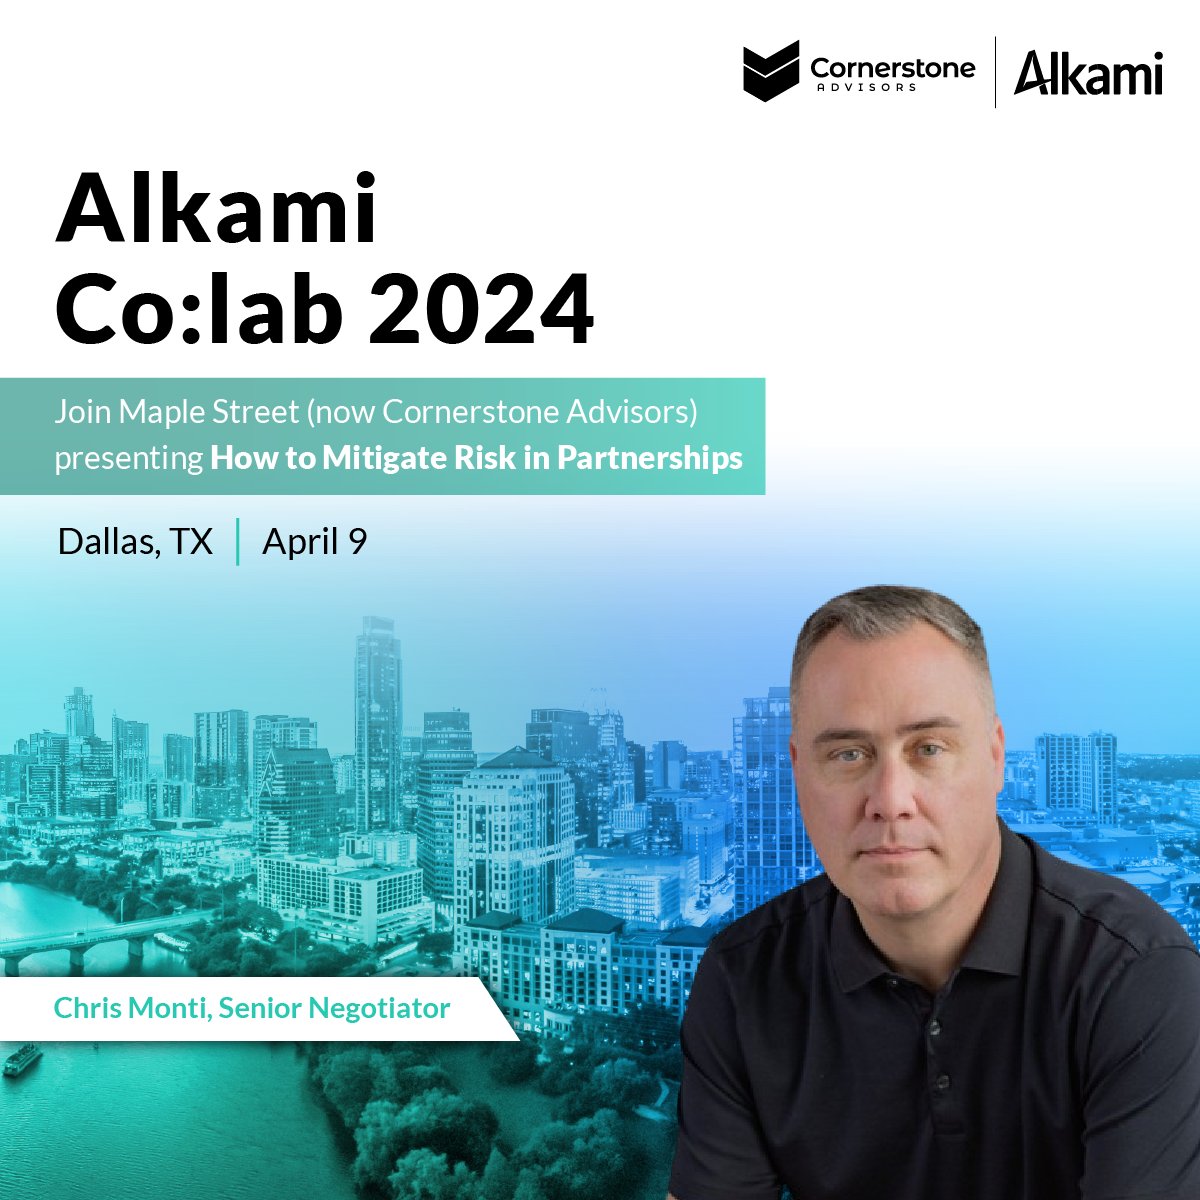 If you're attending @alkamitech Co:lab 2024, don't miss Chris Monti's session on 'How To Mitigate Risk in Partnerships.' Looking forward to seeing you there! #banks #creditunions #fintech #digitalbanking